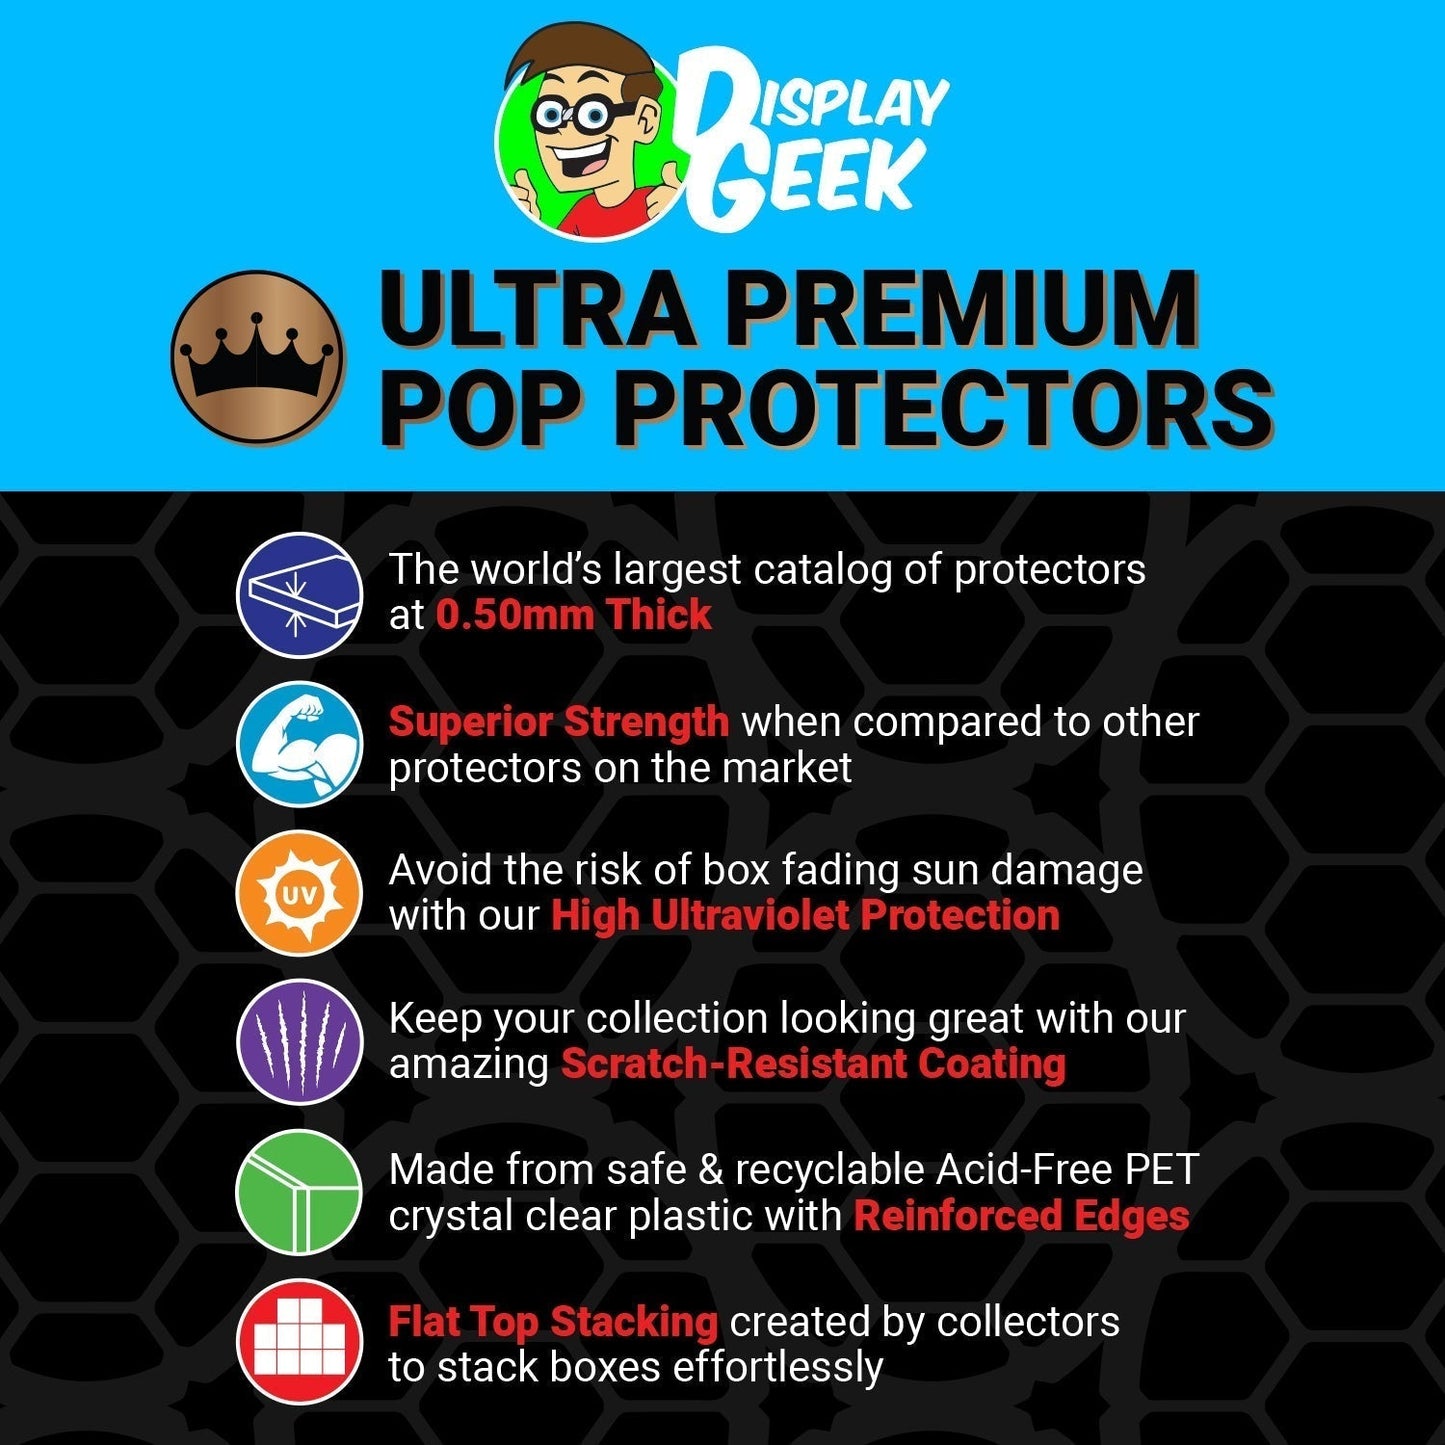 Pop Protector for Pop & Tee Hobgoblin Glow #959 Funko Box - PPG Pop Protector Guide Search Created by Display Geek